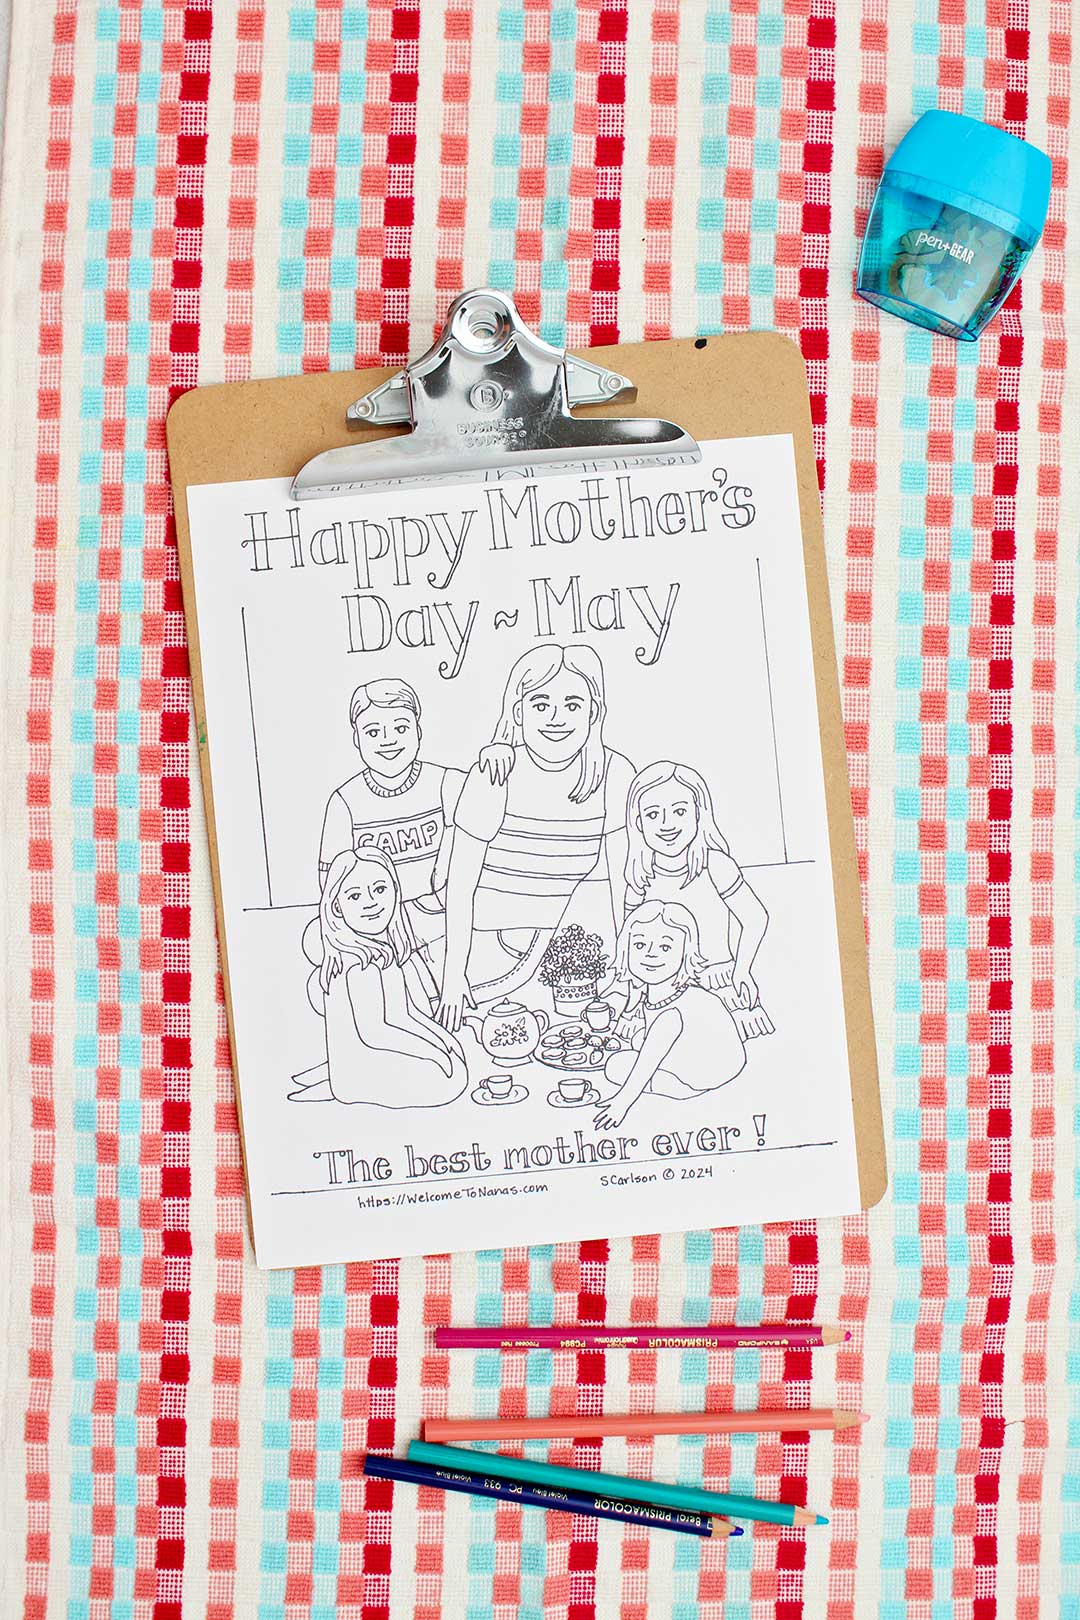 Uncolored Mother's Day Coloring Page attached to clipboard on red, coral and aqua towel with colored pencils near by.